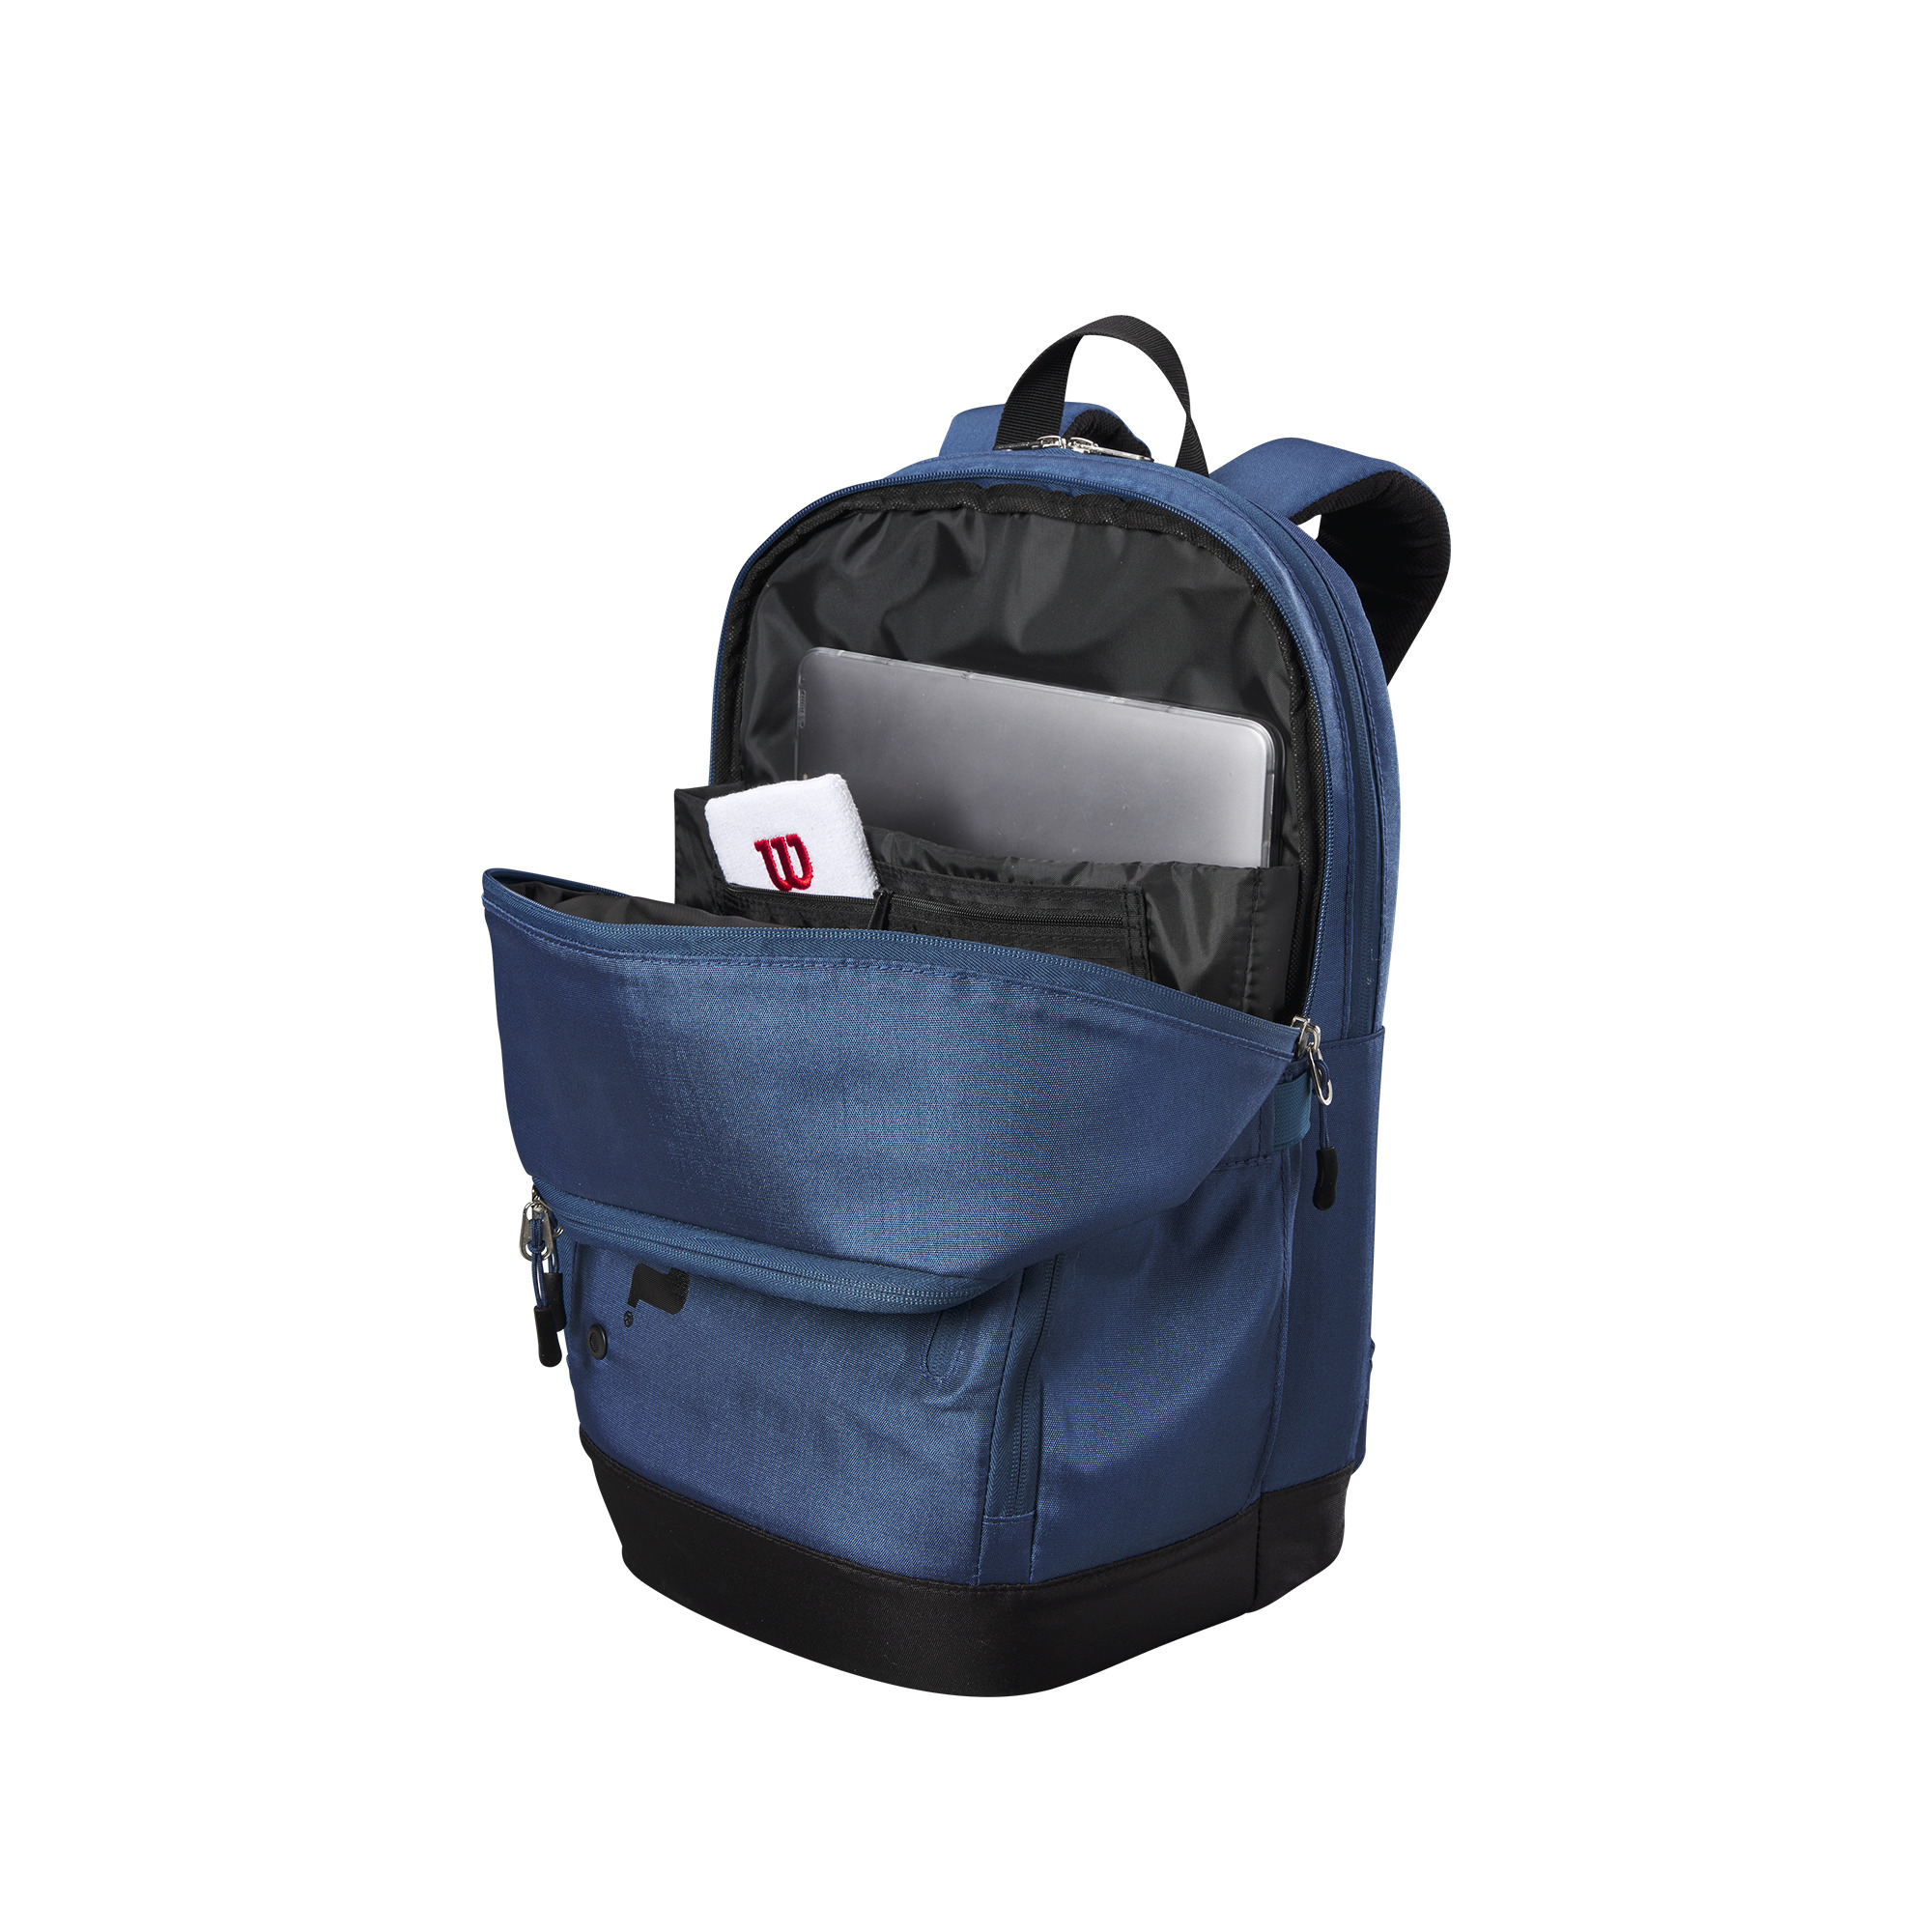 WR8024201_6_Tour_Ultra_Backpack_BU_3.png.high-res